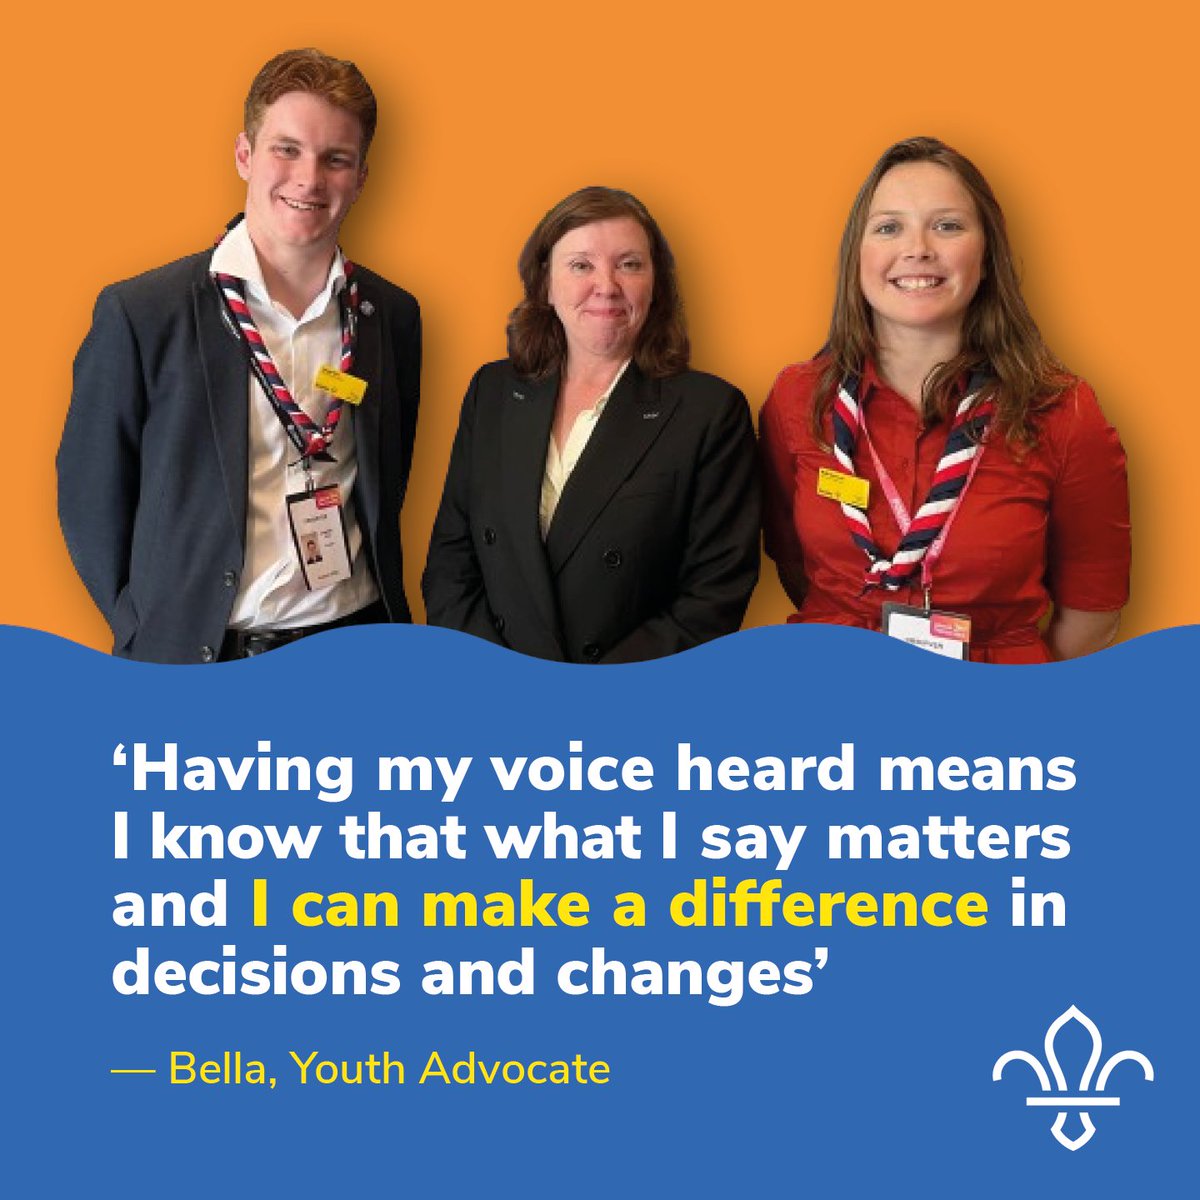 It's #WelcomeToYourVote week and the theme is 'Your Voice Matters' led by @ElectoralCommUK. We're listening and supporting young people in their personal development and empowering them to make a positive contribution to society . 

Find resources here: electoralcommission.org.uk/resources/welc…